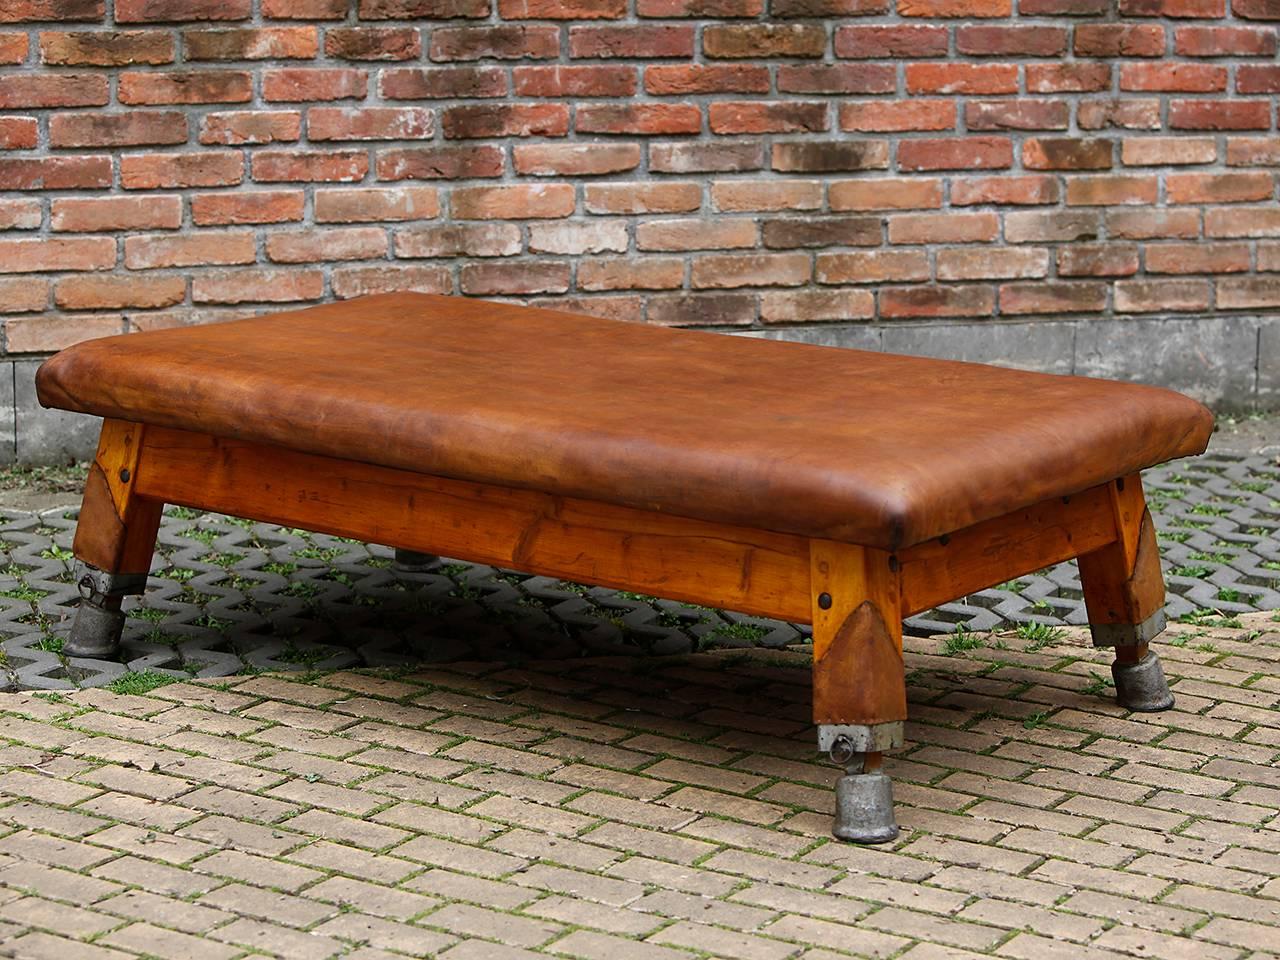 This vintage gymnastics tournament table is from a Czech school sports hall. It was cut to a height of 55 cm and has leather-covered legs and a removable panel. The leather was cleaned and preserved and the wooden parts were restored. The thick cow